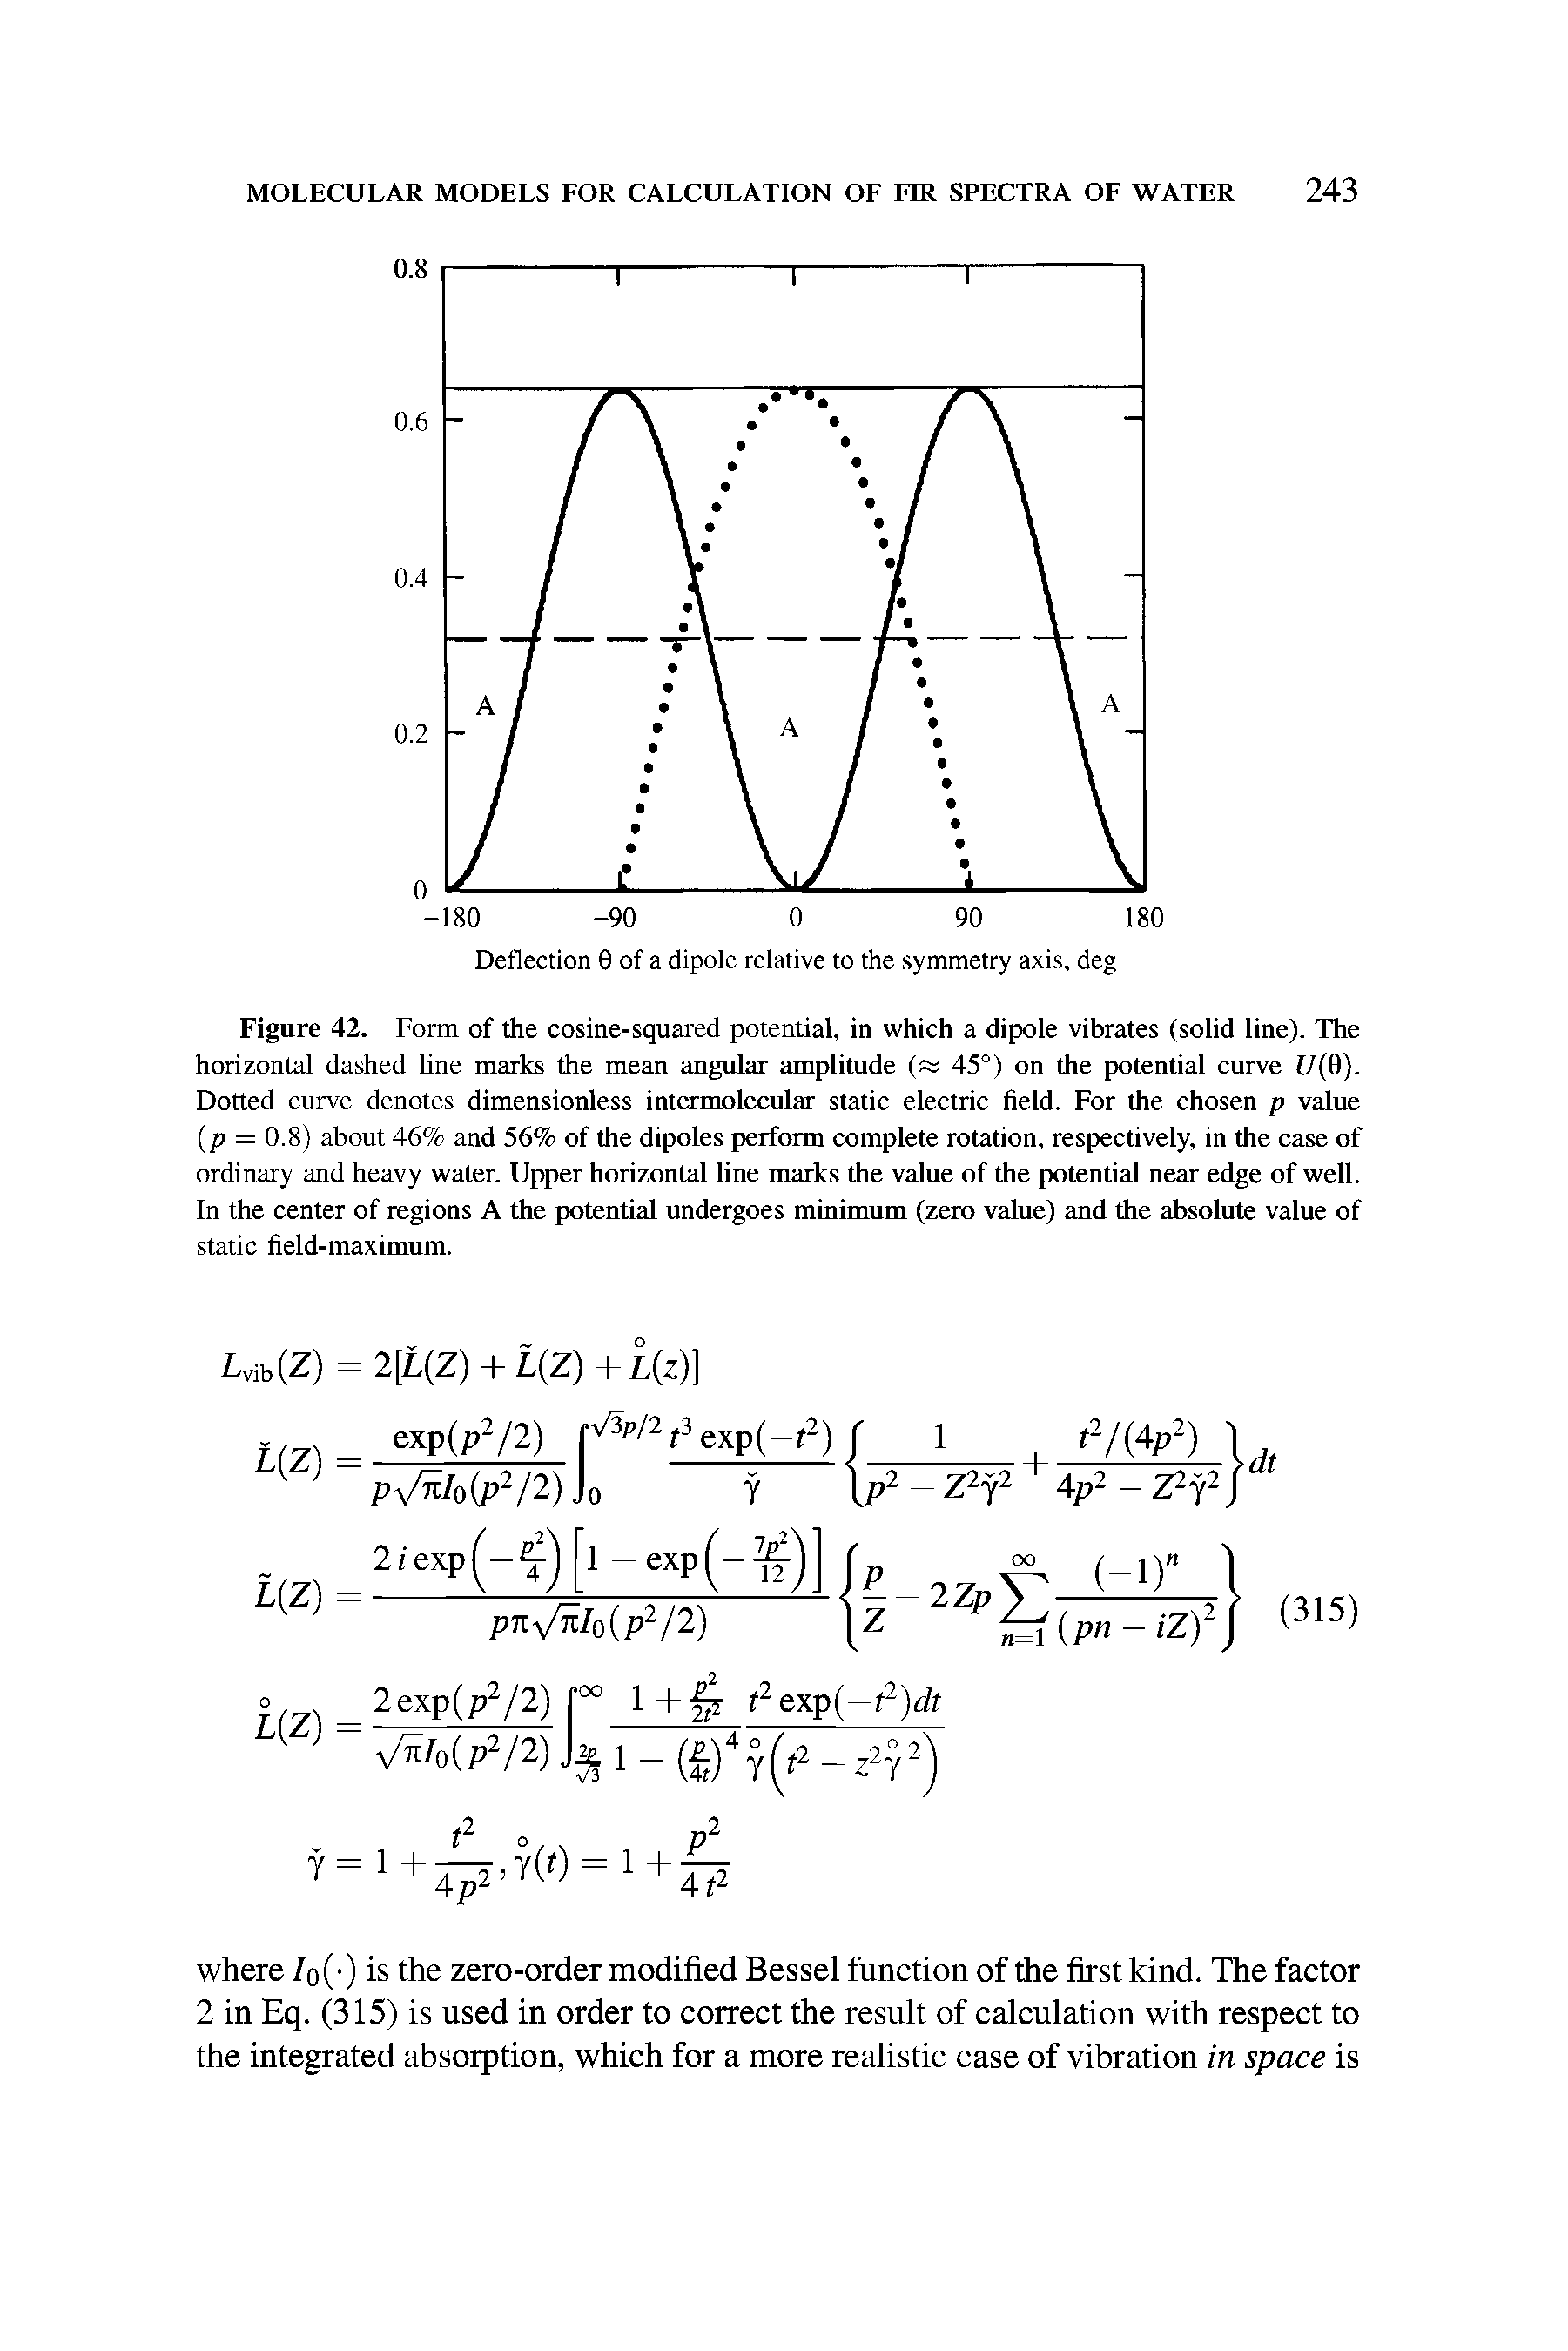 Figure 42. Form of the cosine-squared potential, in which a dipole vibrates (solid line). The horizontal dashed line marks the mean angular amplitude ( 45°) on the potential curve C/(0). Dotted curve denotes dimensionless intermolecular static electric field. For the chosen p value (p = 0.8) about 46% and 56% of the dipoles perform complete rotation, respectively, in the case of ordinary and heavy water. Upper horizontal line marks the value of the potential near edge of well. In the center of regions A the potential undergoes minimum (zero value) and the absolute value of static field-maximum.